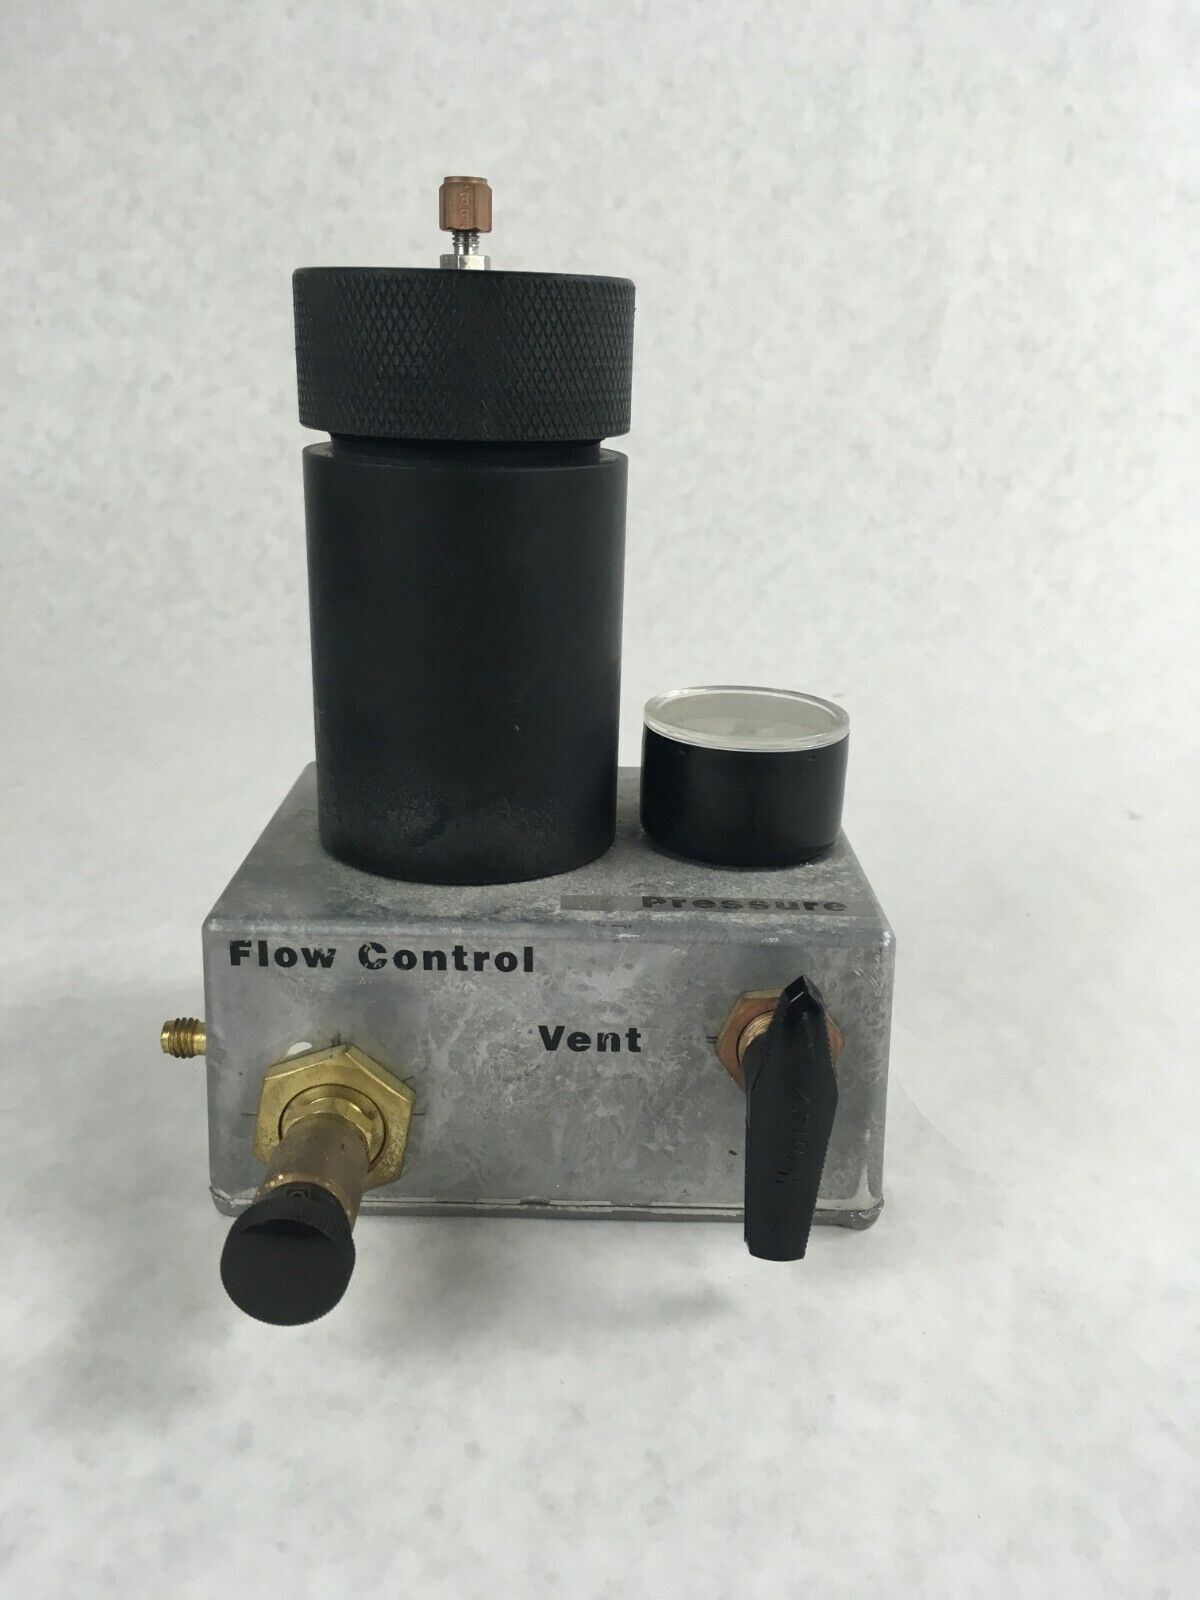 Pressure Compensated Flow Control Valve Vent With Container Vial